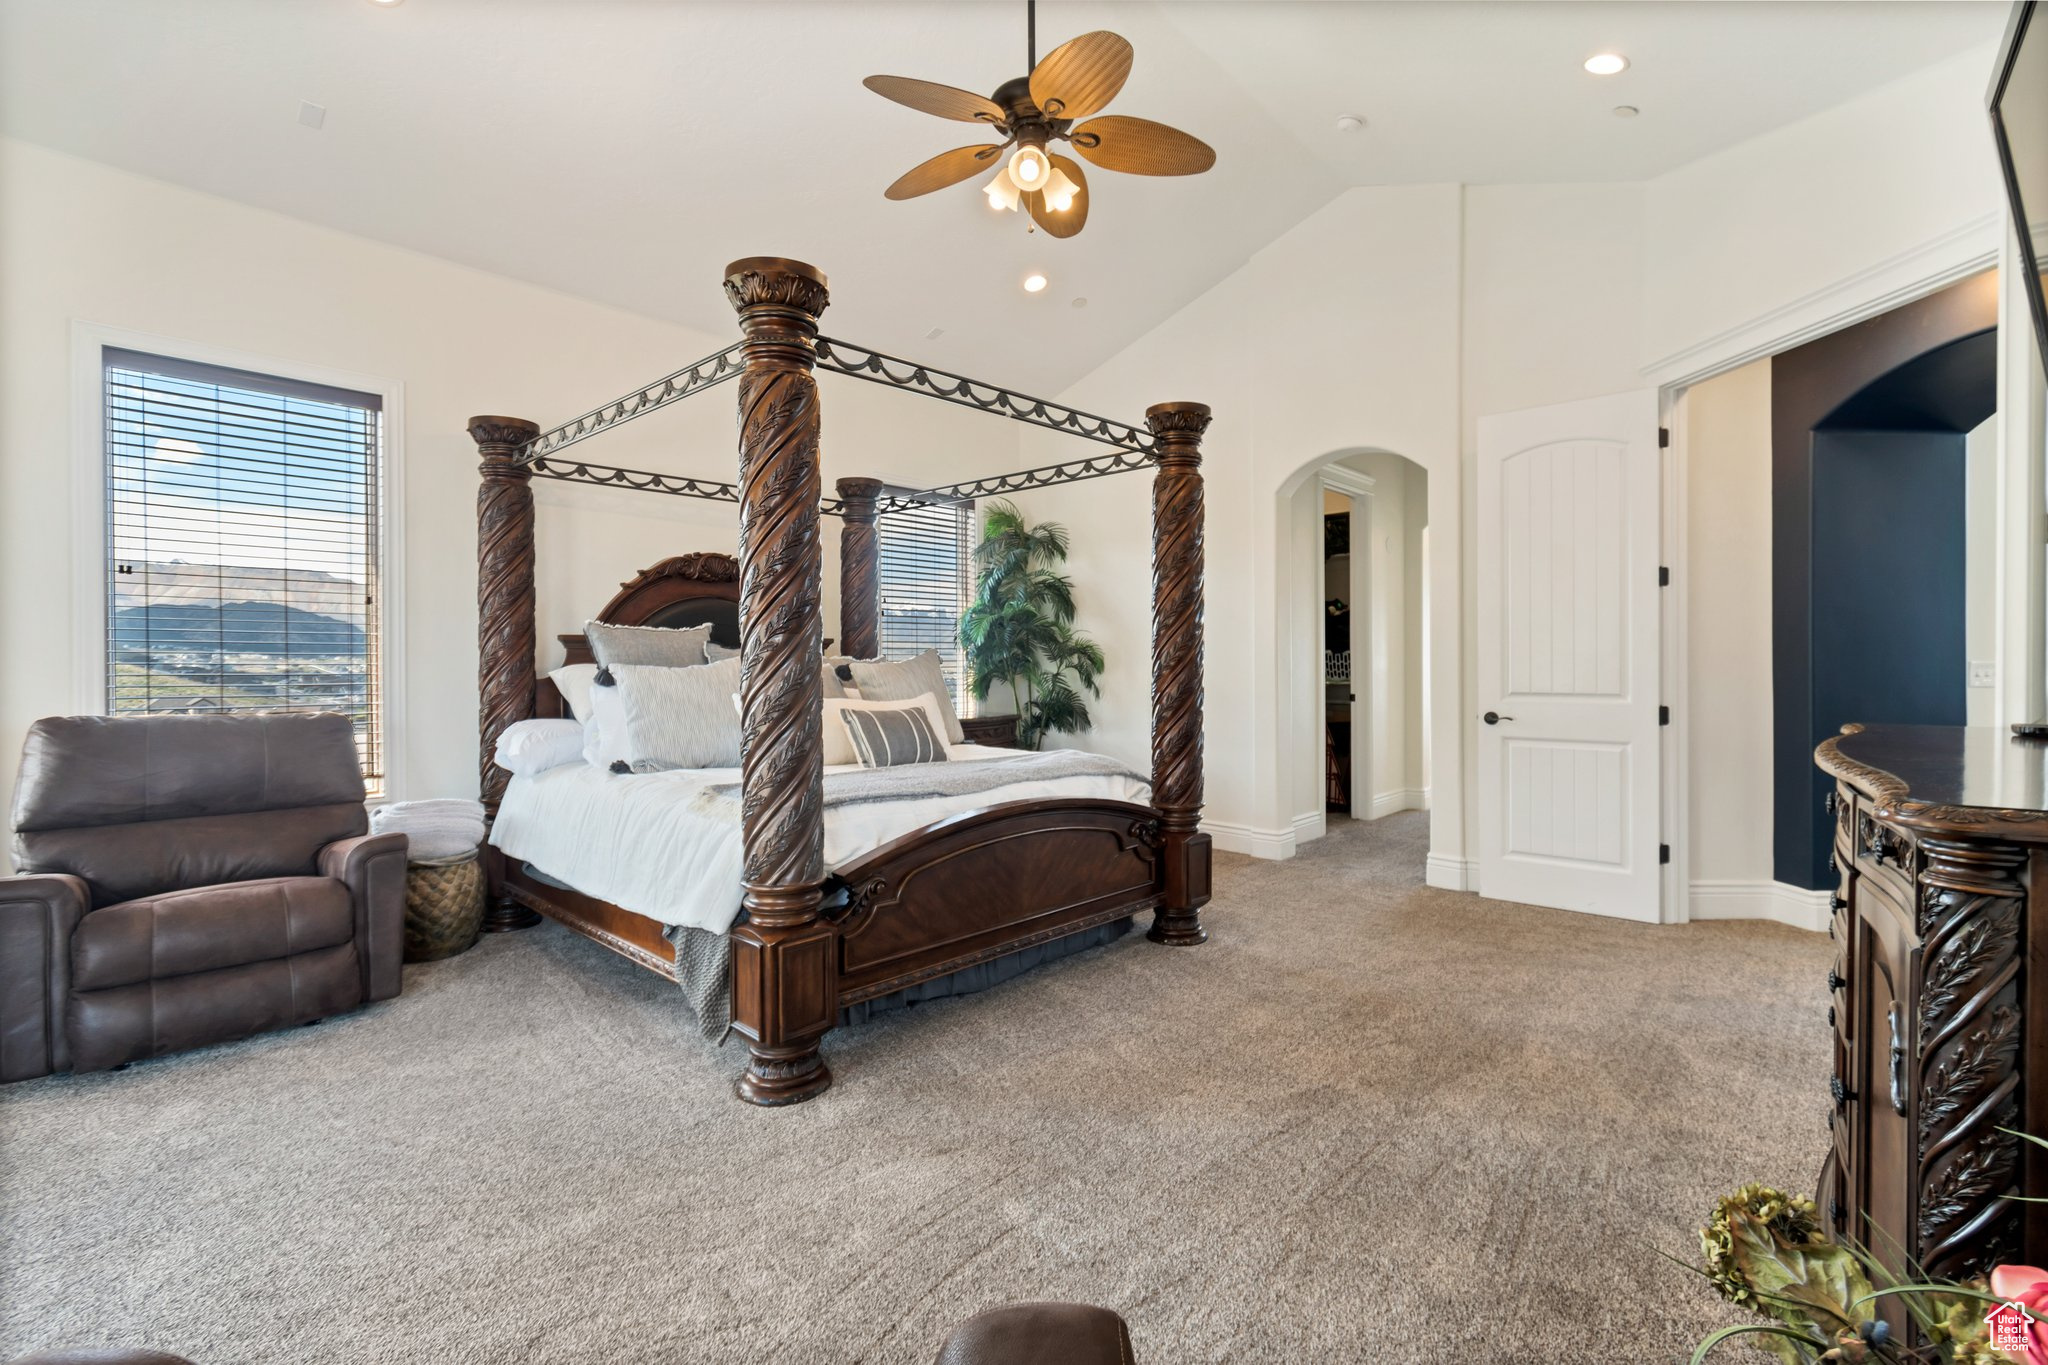 Bedroom with high vaulted ceiling, ceiling fan, and carpet